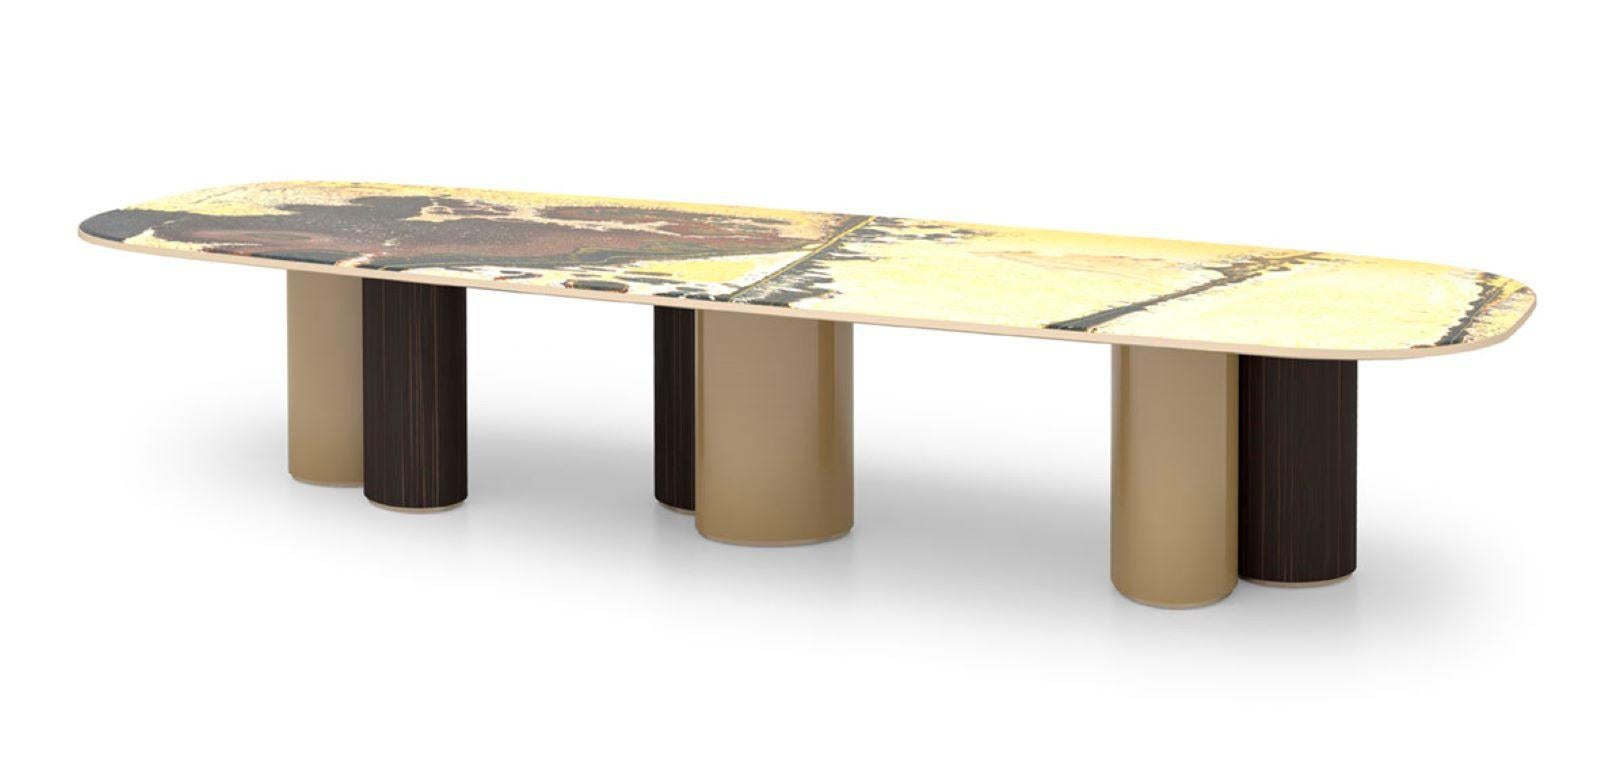 A table of exceptional dimensions that enhances the originality of the materials with which it is composed. Born from a research process to achieve innovation, it is one-of-a-kind. The Vetrite top can have different variations and finishes, such as